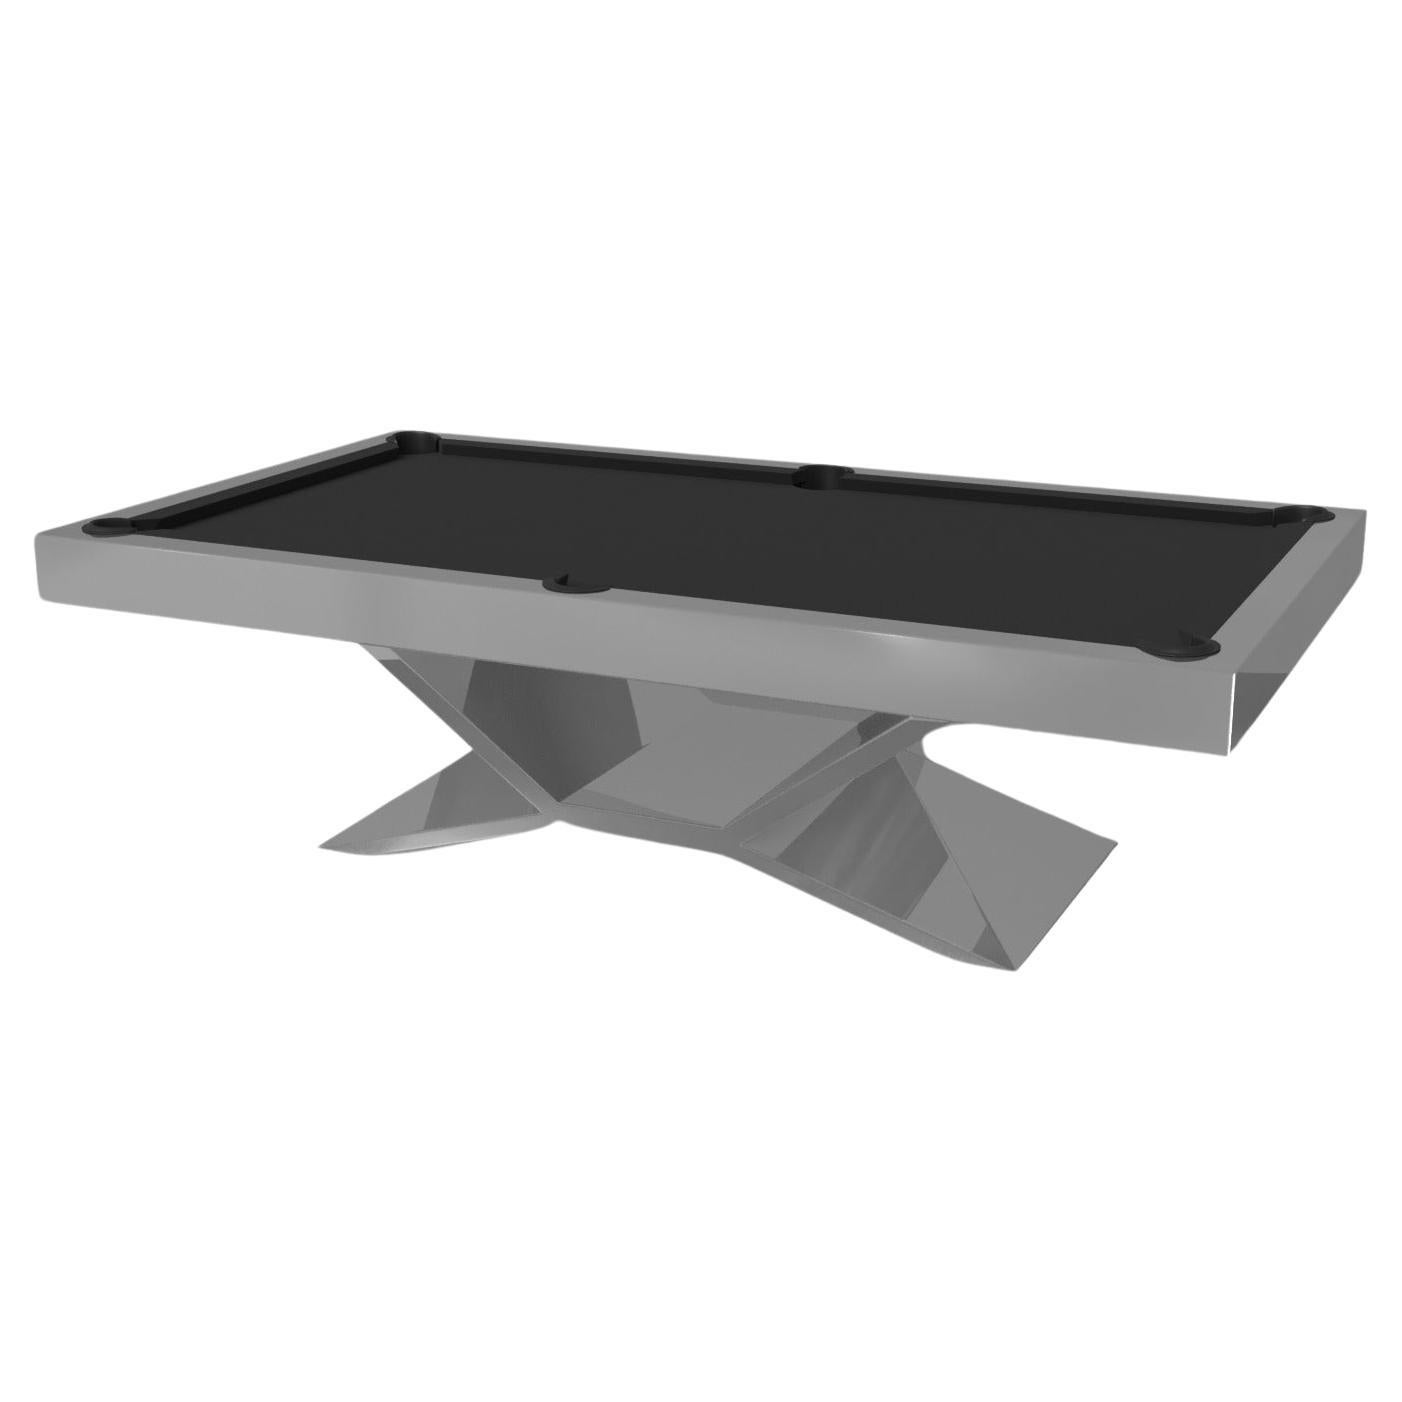 Elevate Customs Kors Pool Table / Stainless Steel Metal in 7'/8' - Made in USA For Sale